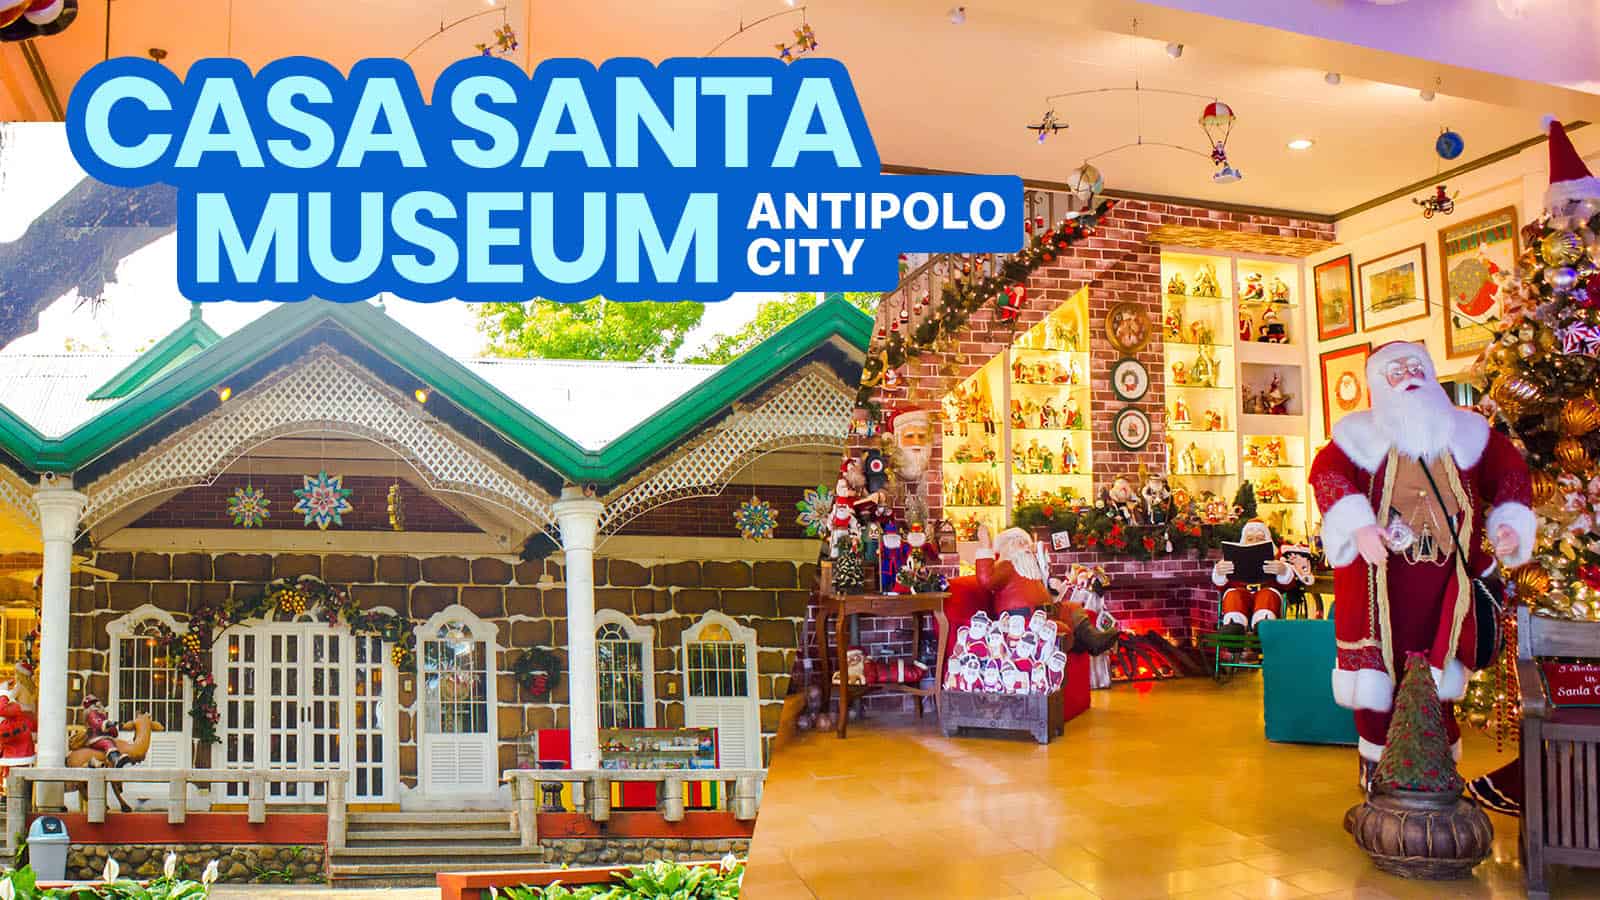 CASA SANTA MUSEUM IN ANTIPOLO: Entrance Fee, Schedule & Other Tips